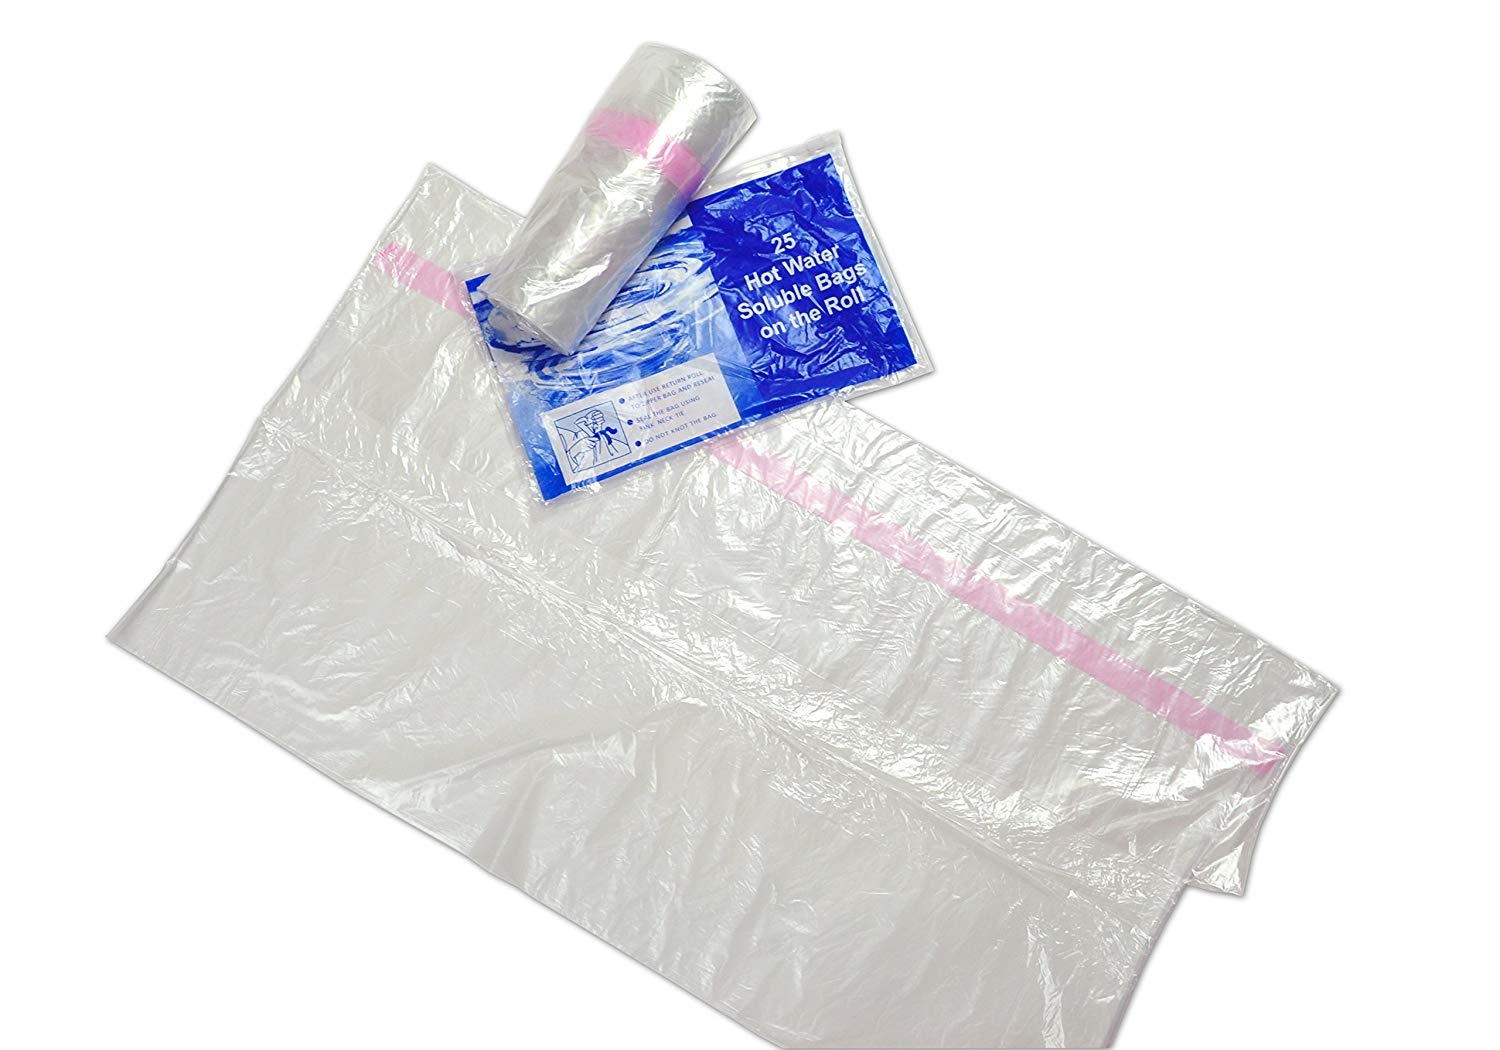 Water-soluble Bag